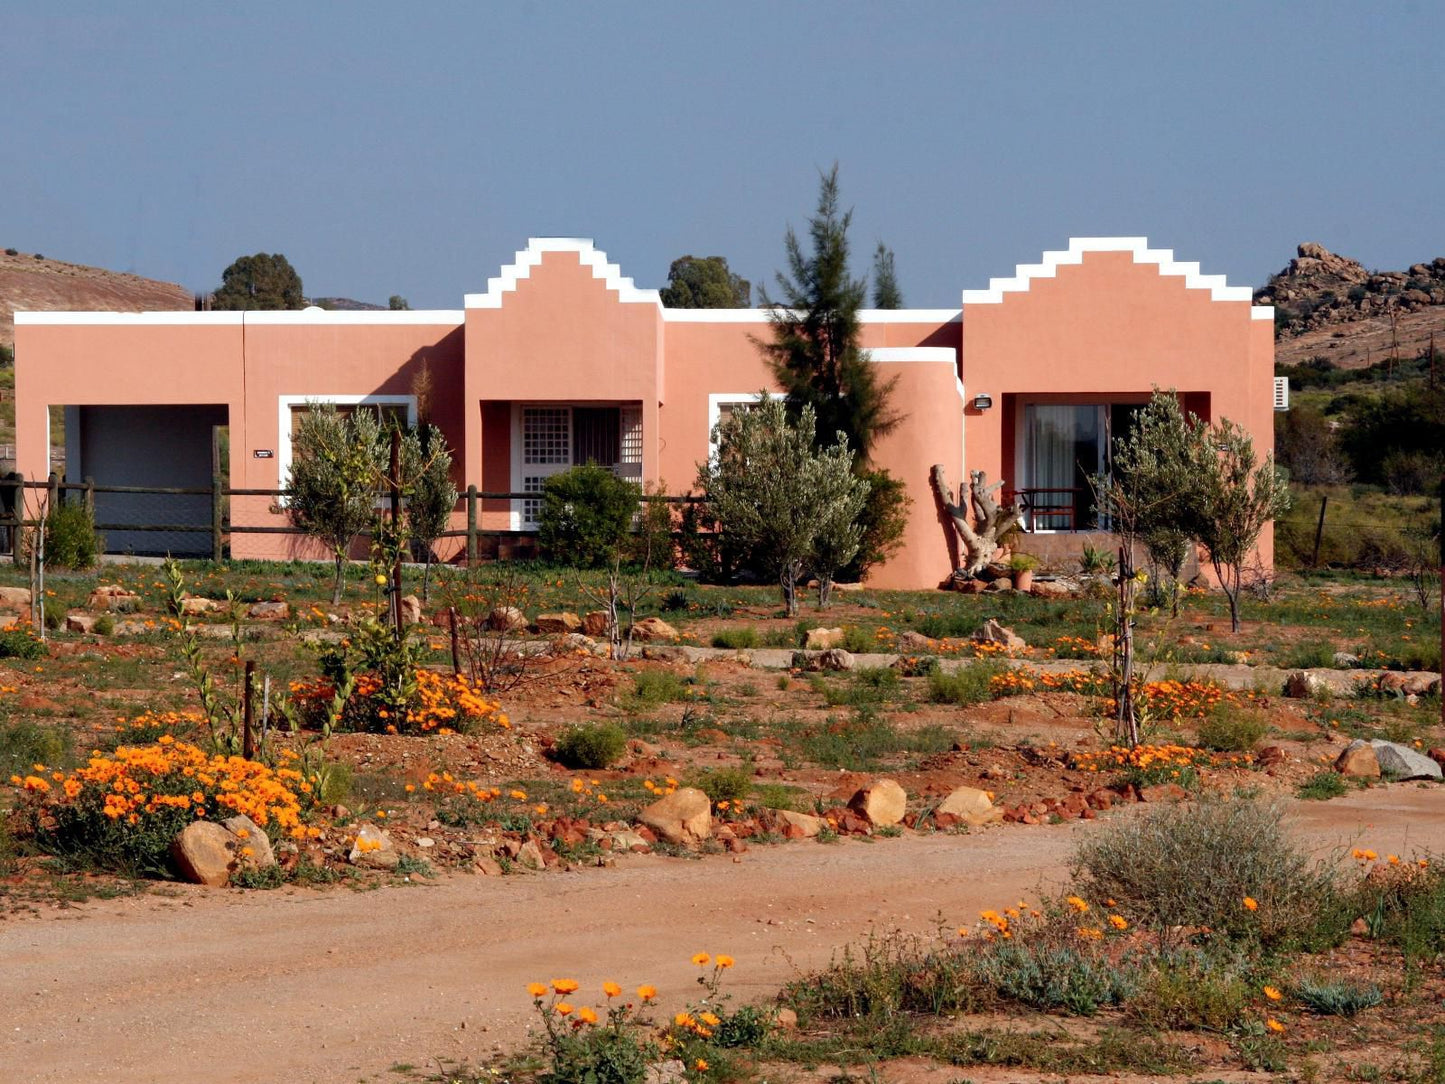 Daisy Country Lodge Springbok Northern Cape South Africa Building, Architecture, House, Plant, Nature, Desert, Sand